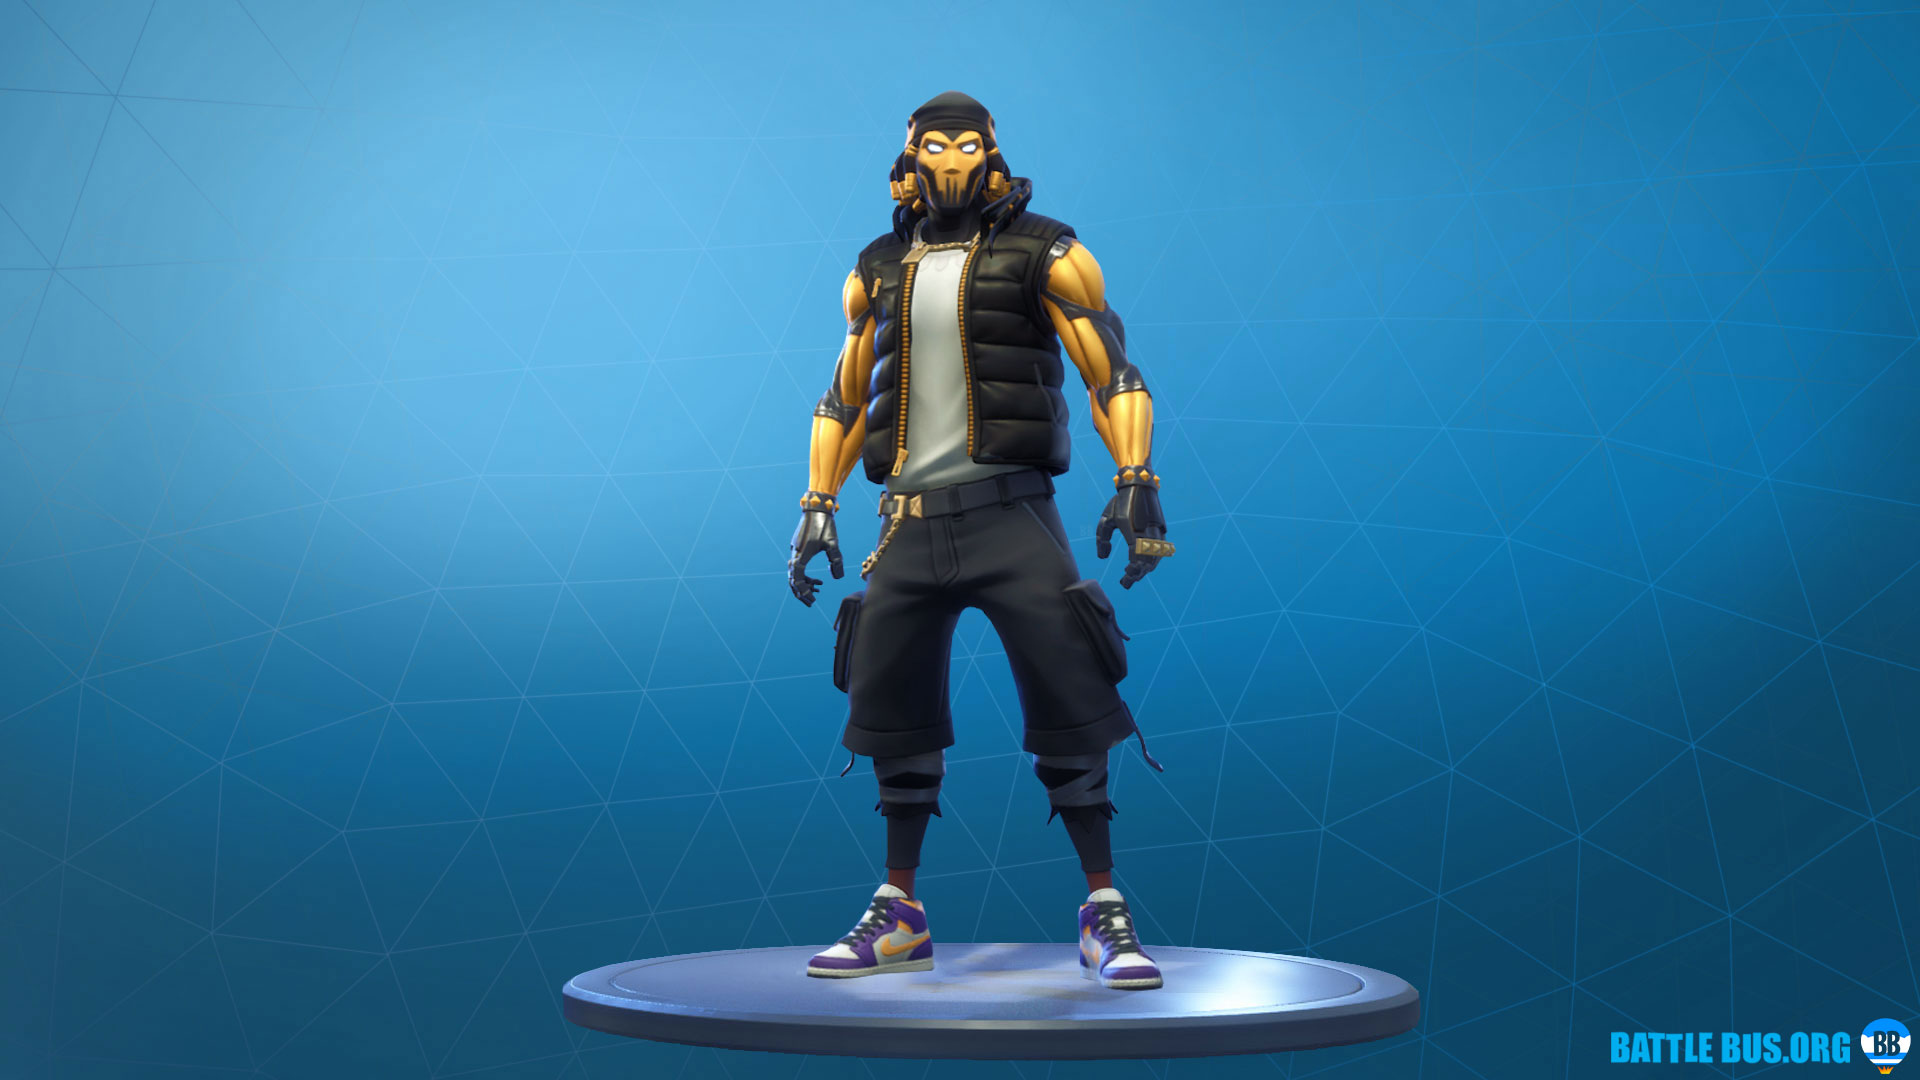 Grind - Outfit - Hang Time Set - Fortnite News, Skins, Settings, Updates.